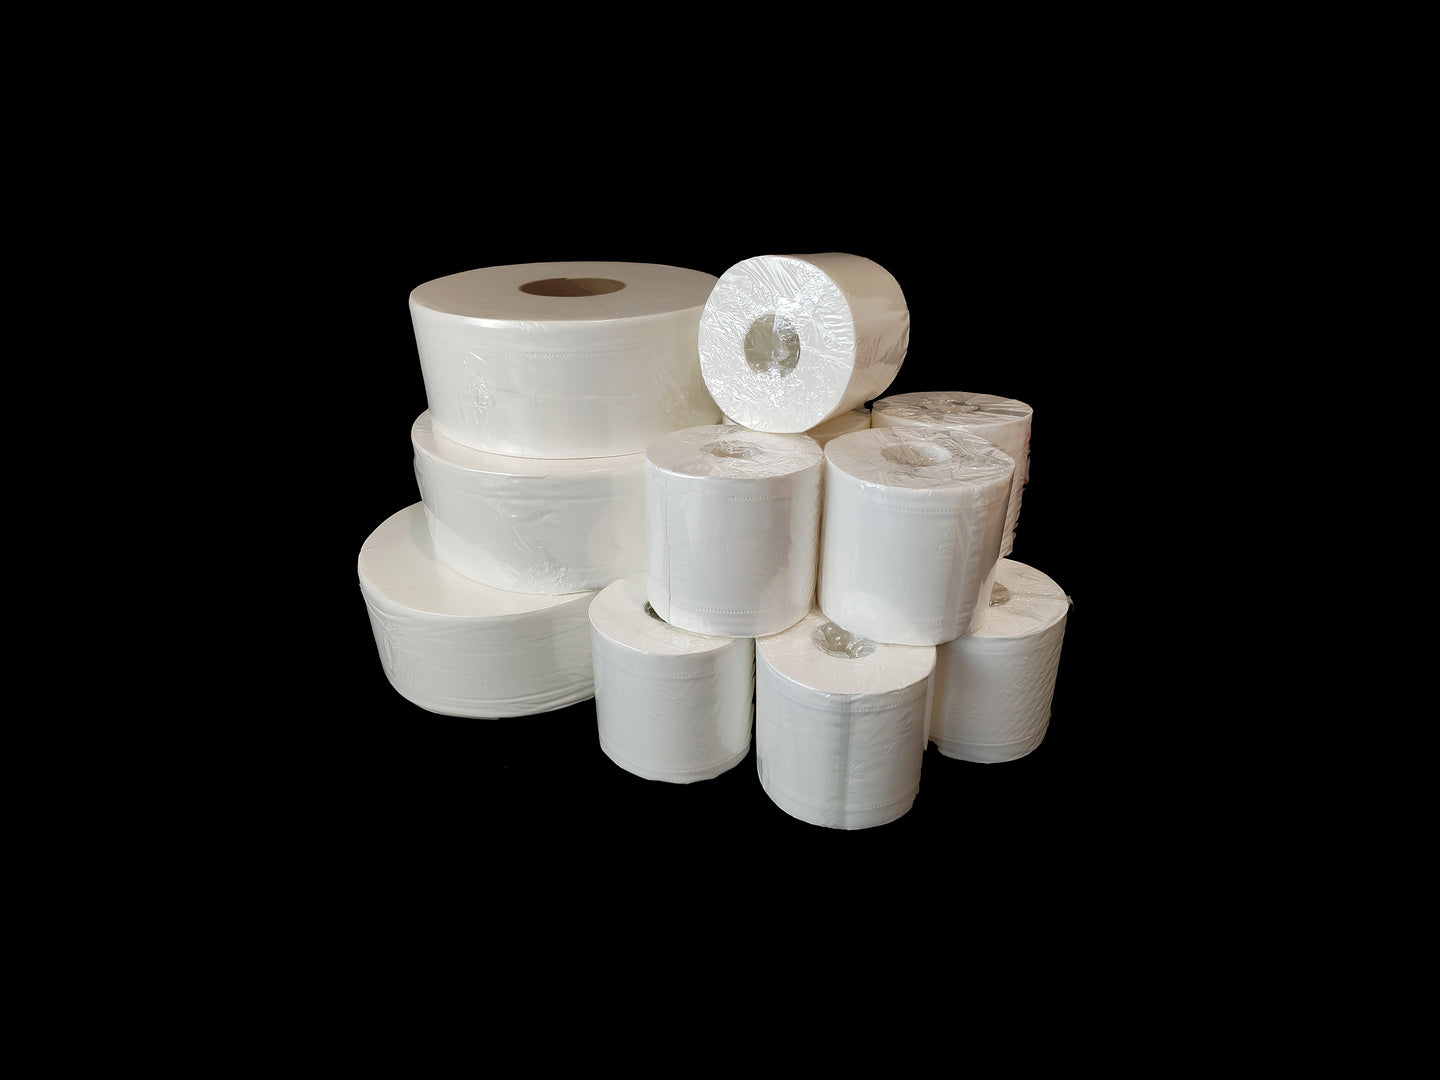 ROYAL KINGS SILKWAVE TISSUE PAPER ROLL 2PLY, 300 METRES, 3PLY 300SHEETS 48ROLLS